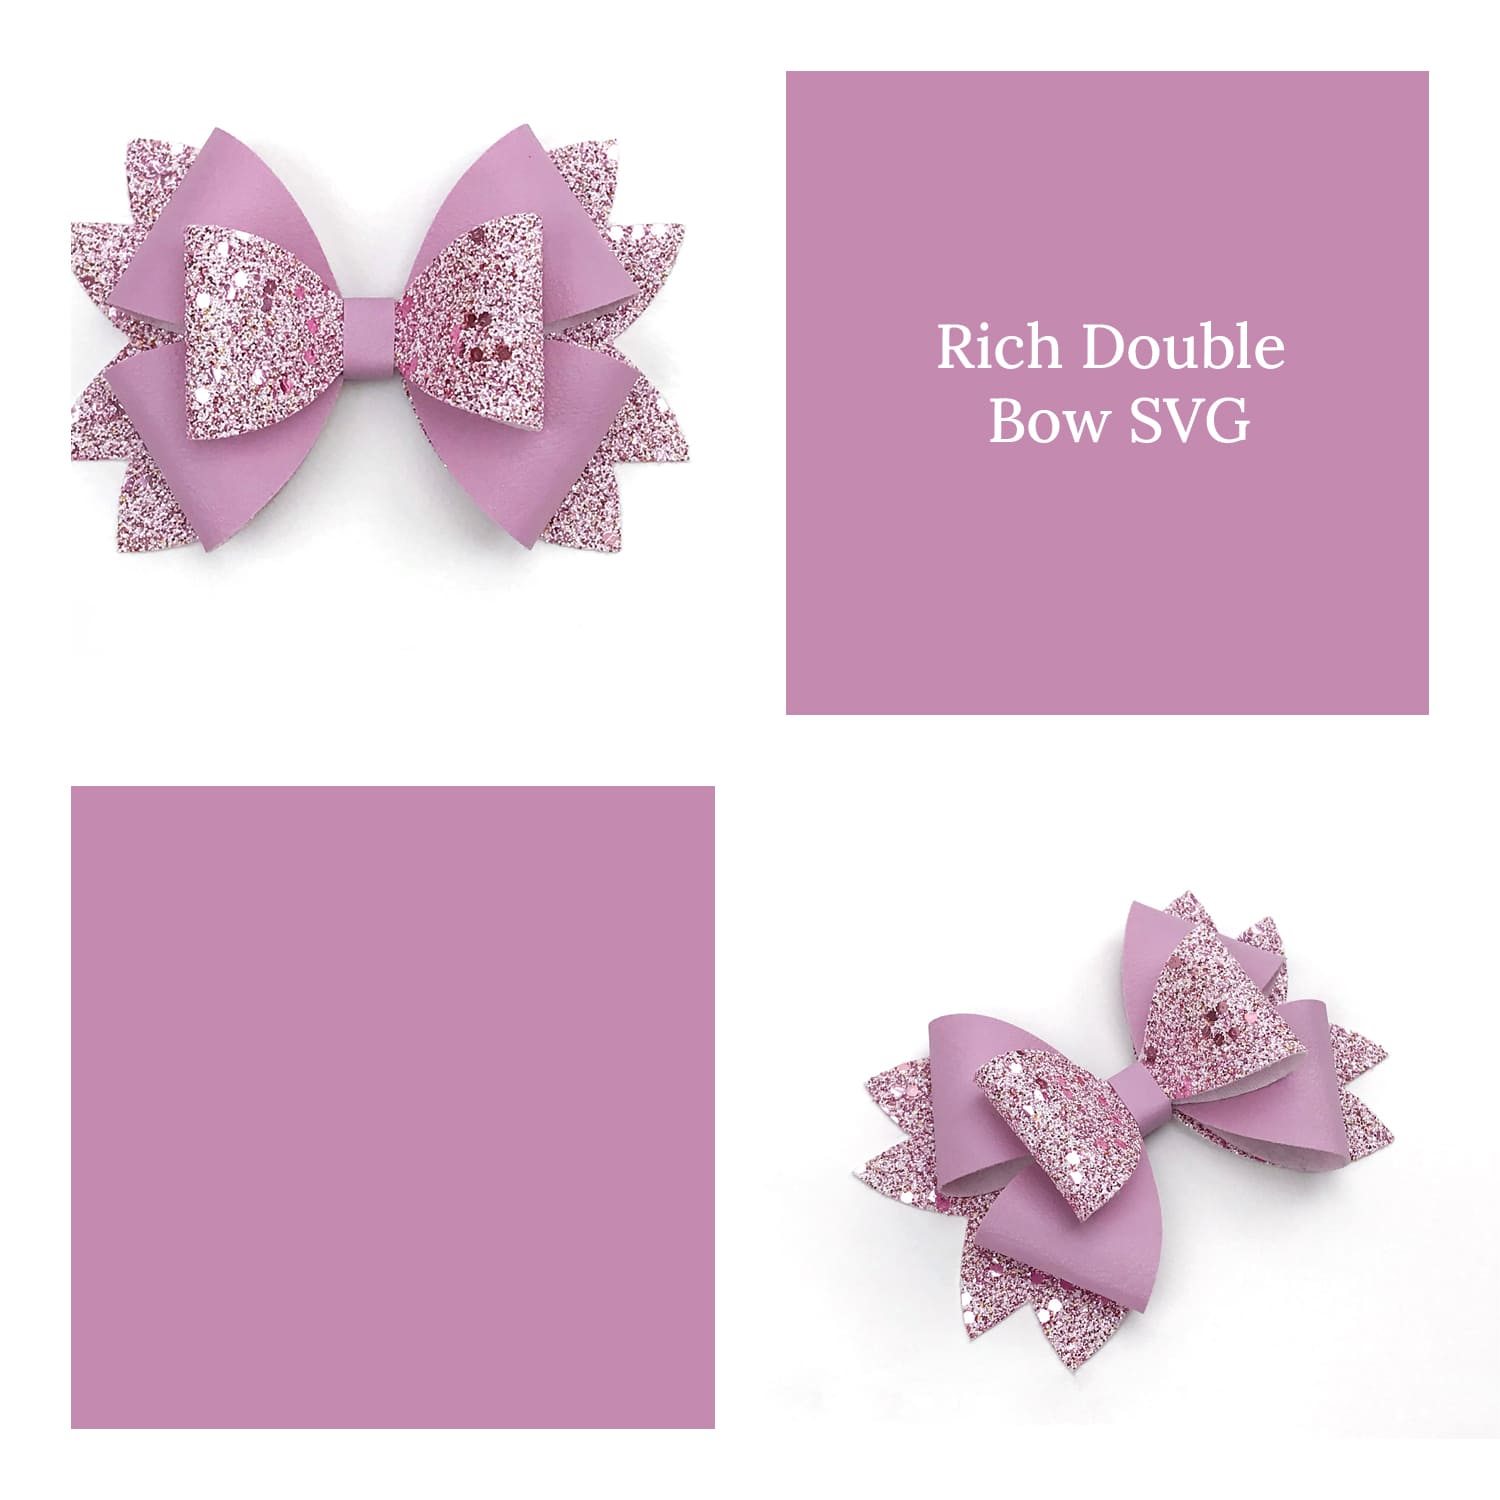 Rich Double Bow SVG cut files, Bow template cover.